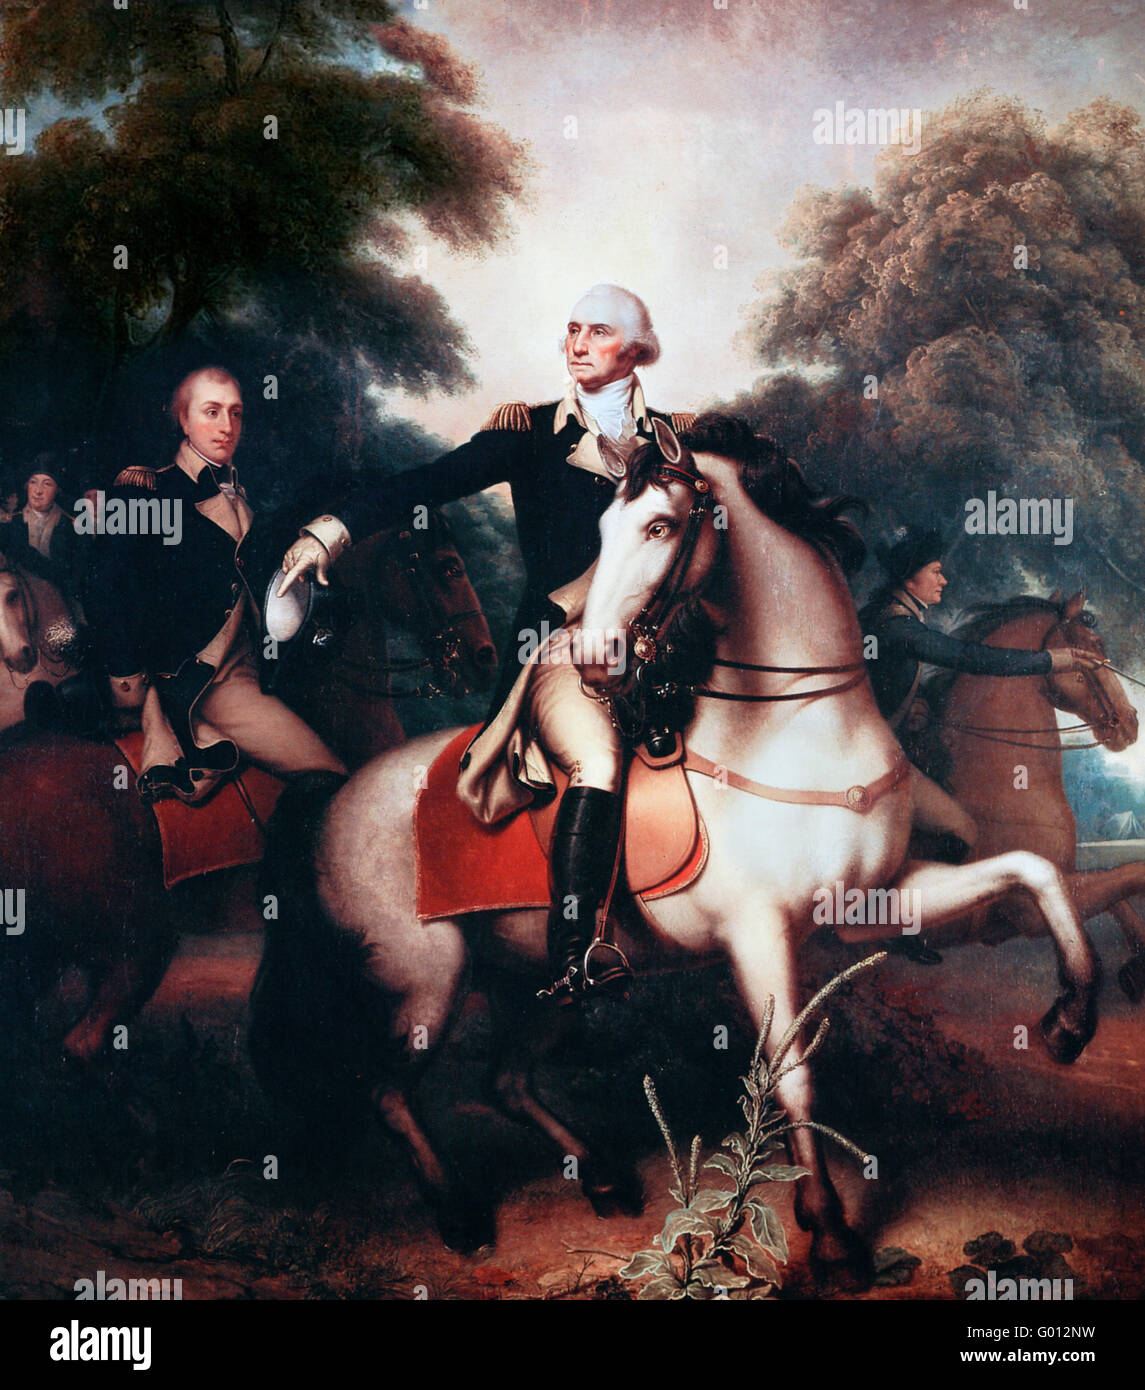 General George Washington in full dress uniform before the final battle of the Revolutionary War at Yorktown, Virginia in 1781. The figure to Washington's immediate right is the Marquis de Lafayette, and the three officers barely visible behind him are Compte de Rochambeau, Henry Knox and Benjamin Lincoln. Alexander Hamilton is the rider on the right of the picture. Reproduction of a painting by Rembrandt Peale. Stock Photo